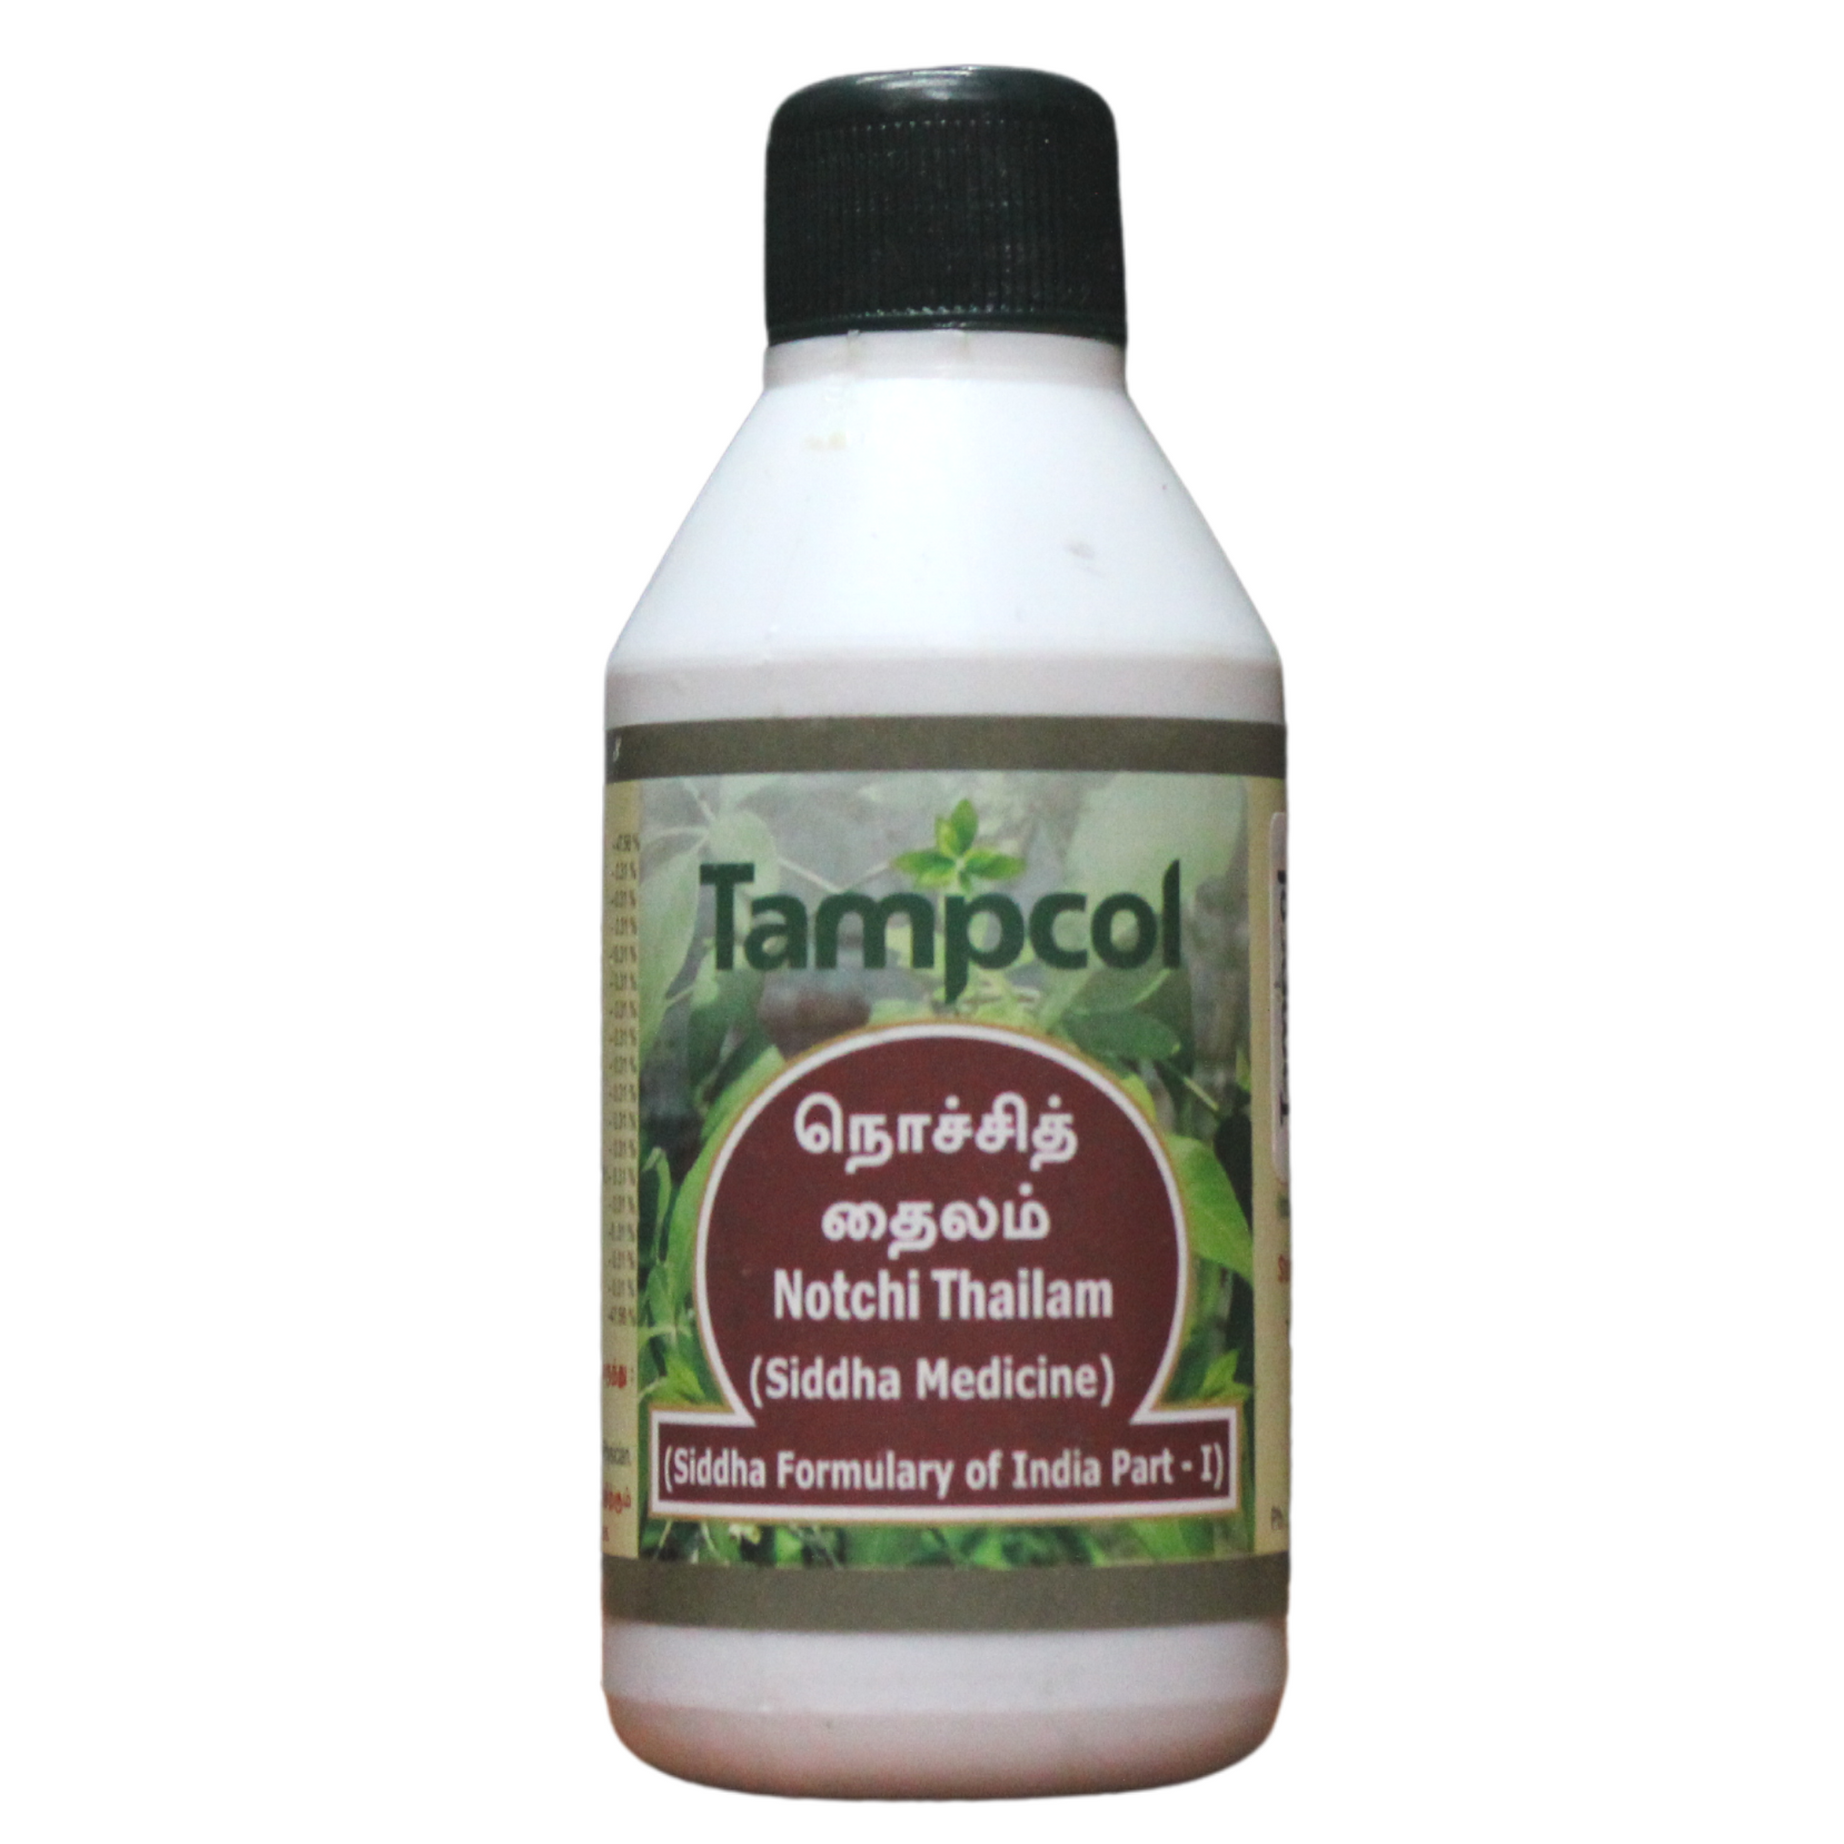 Shop Tampcol Nochi Thailam 100ml at price 88.50 from Tampcol Online - Ayush Care